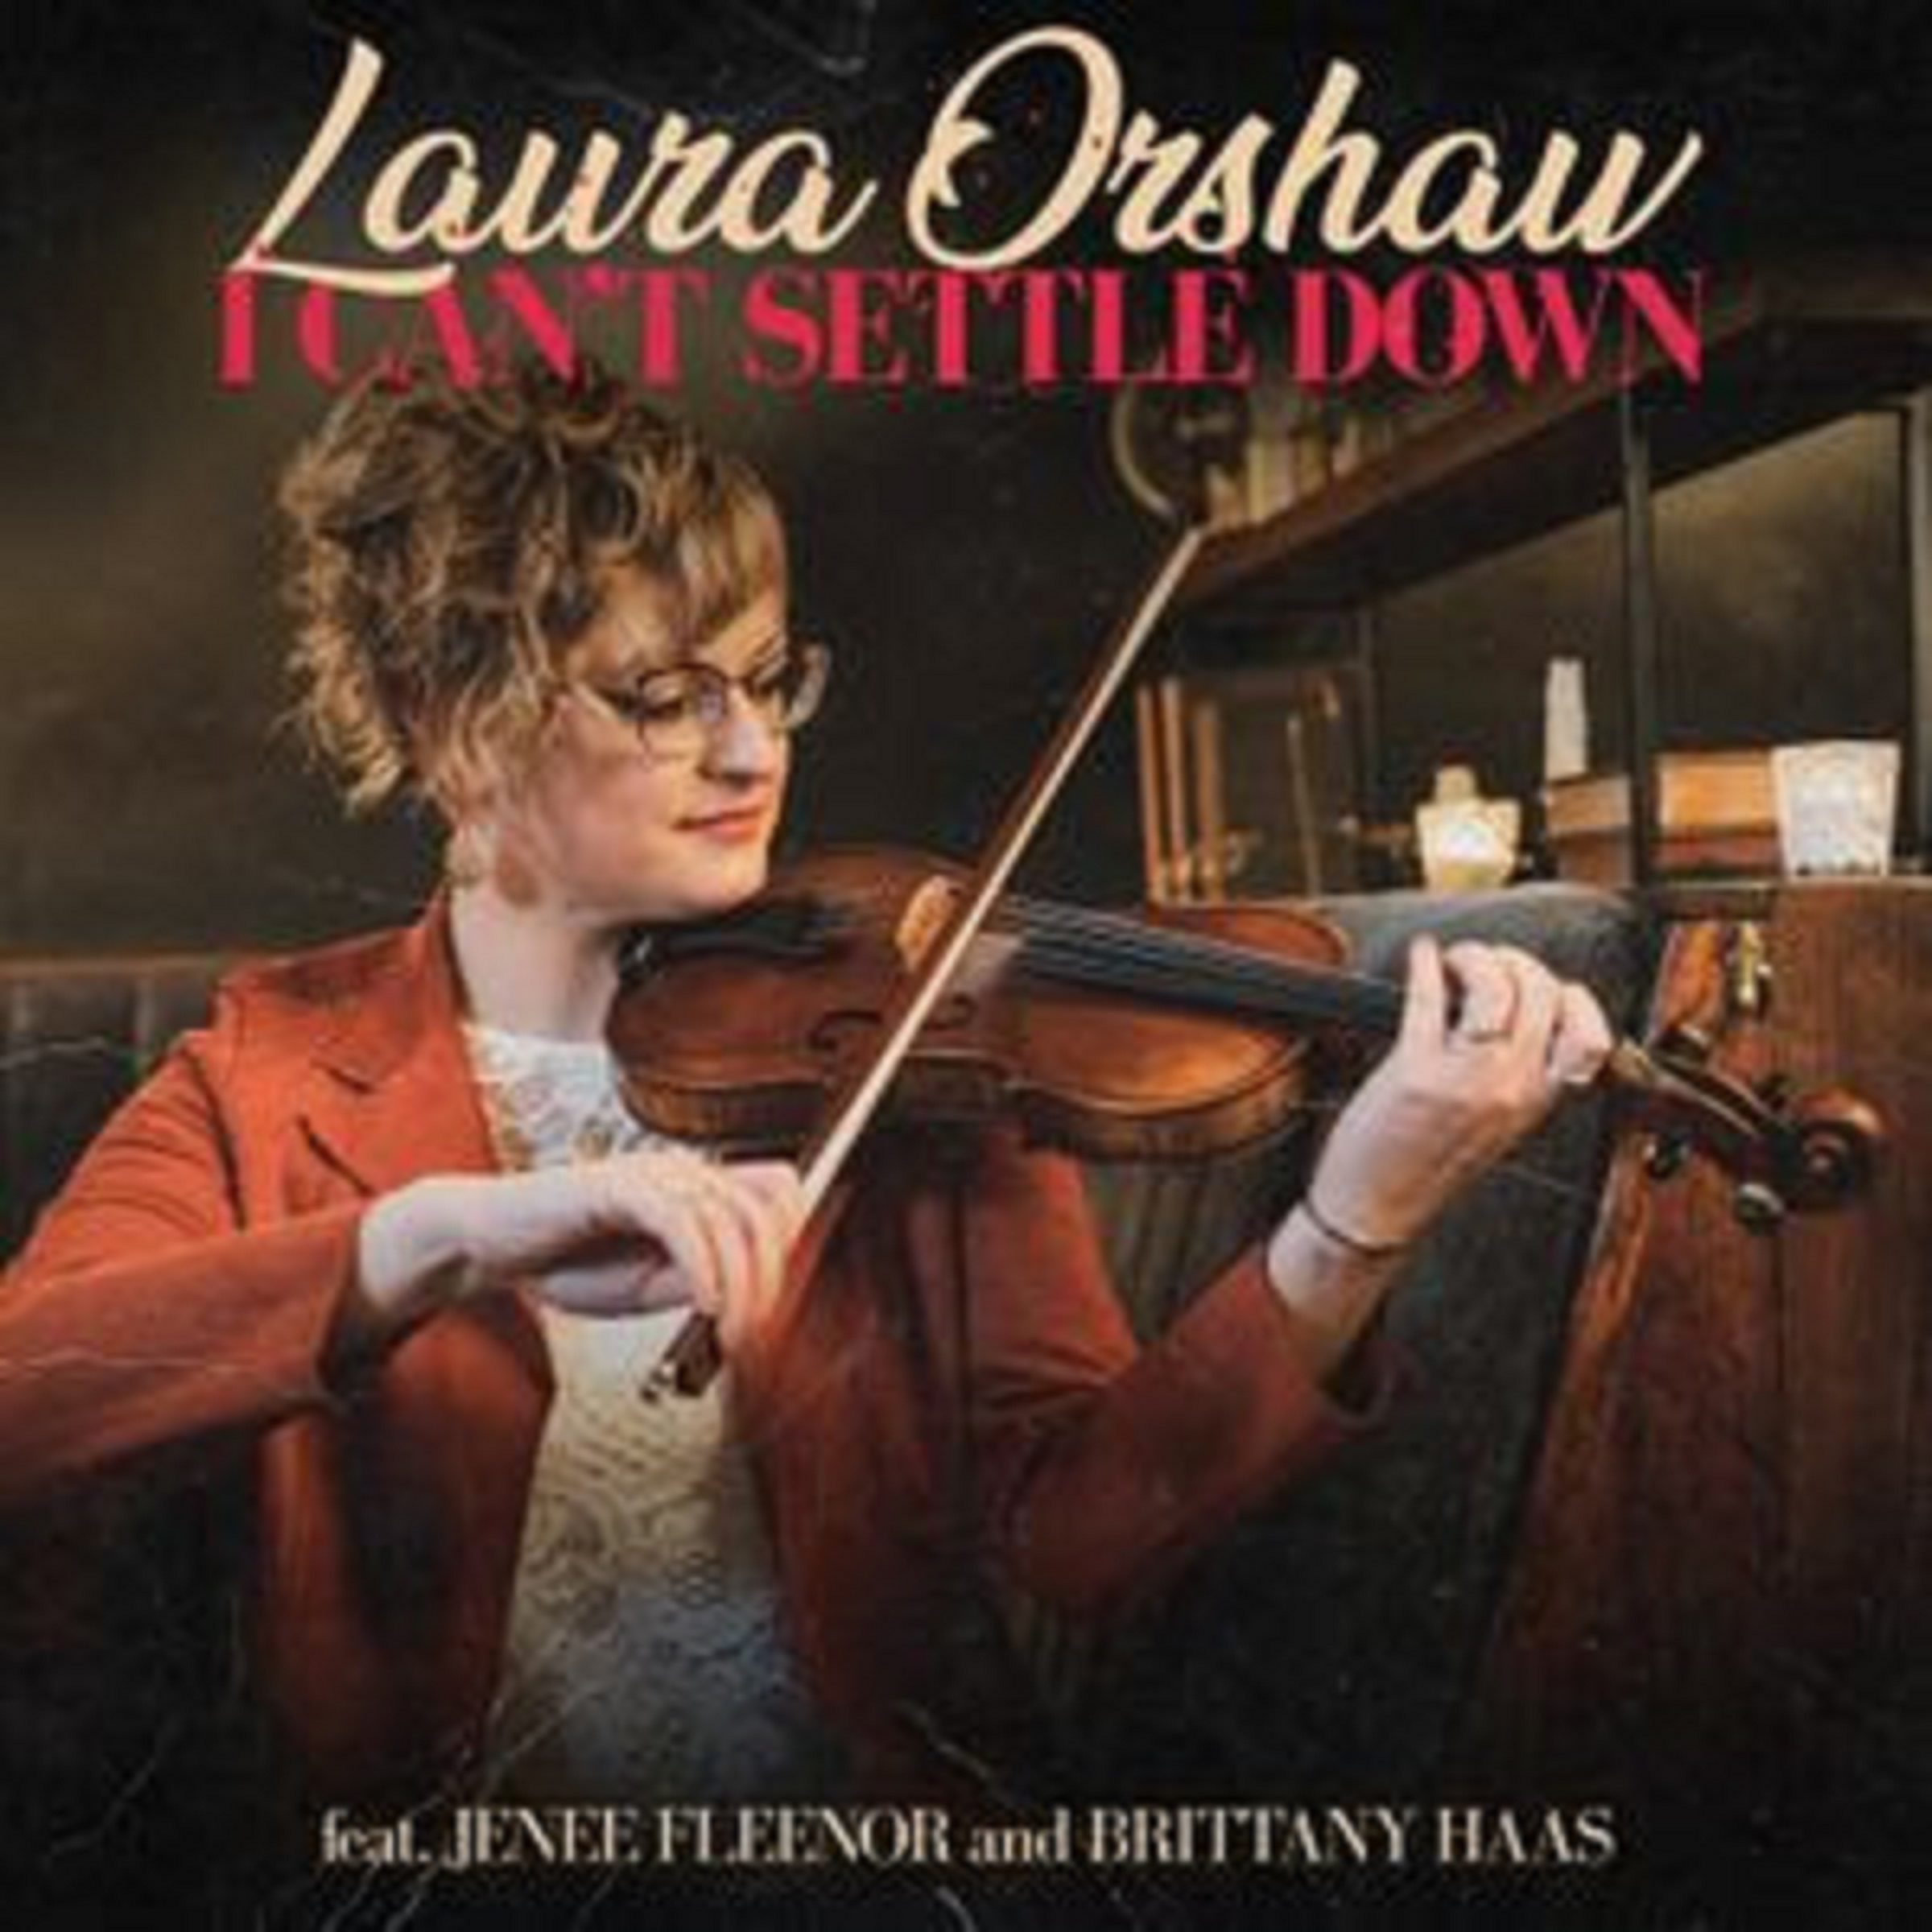 Laura Orshaw releases new single "I Can't Settle Down"